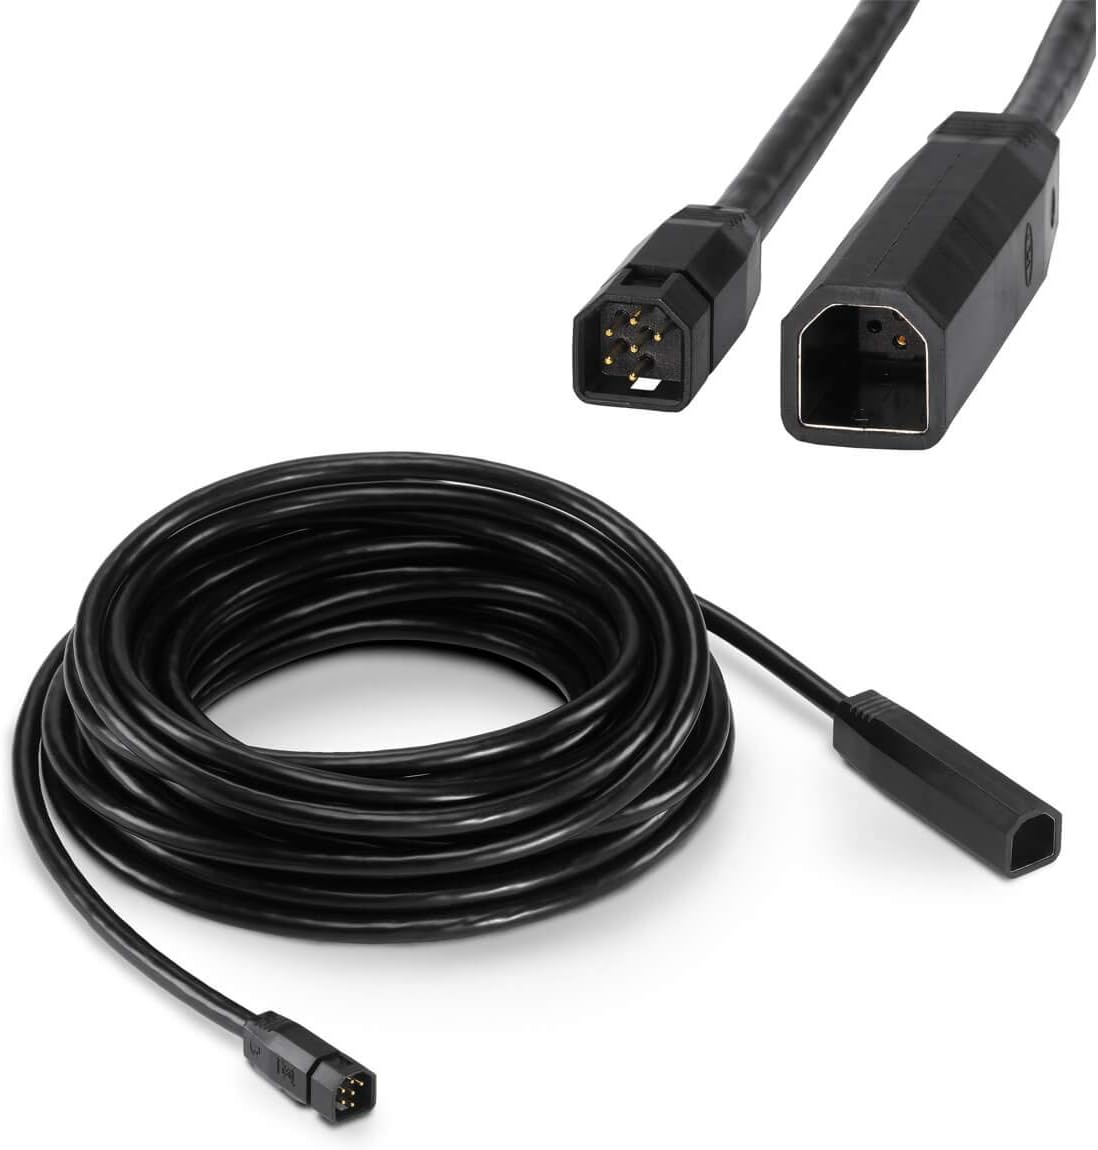 Humminbird Transducer Extension Cable - Humminbird Transducer Extension Cable Review